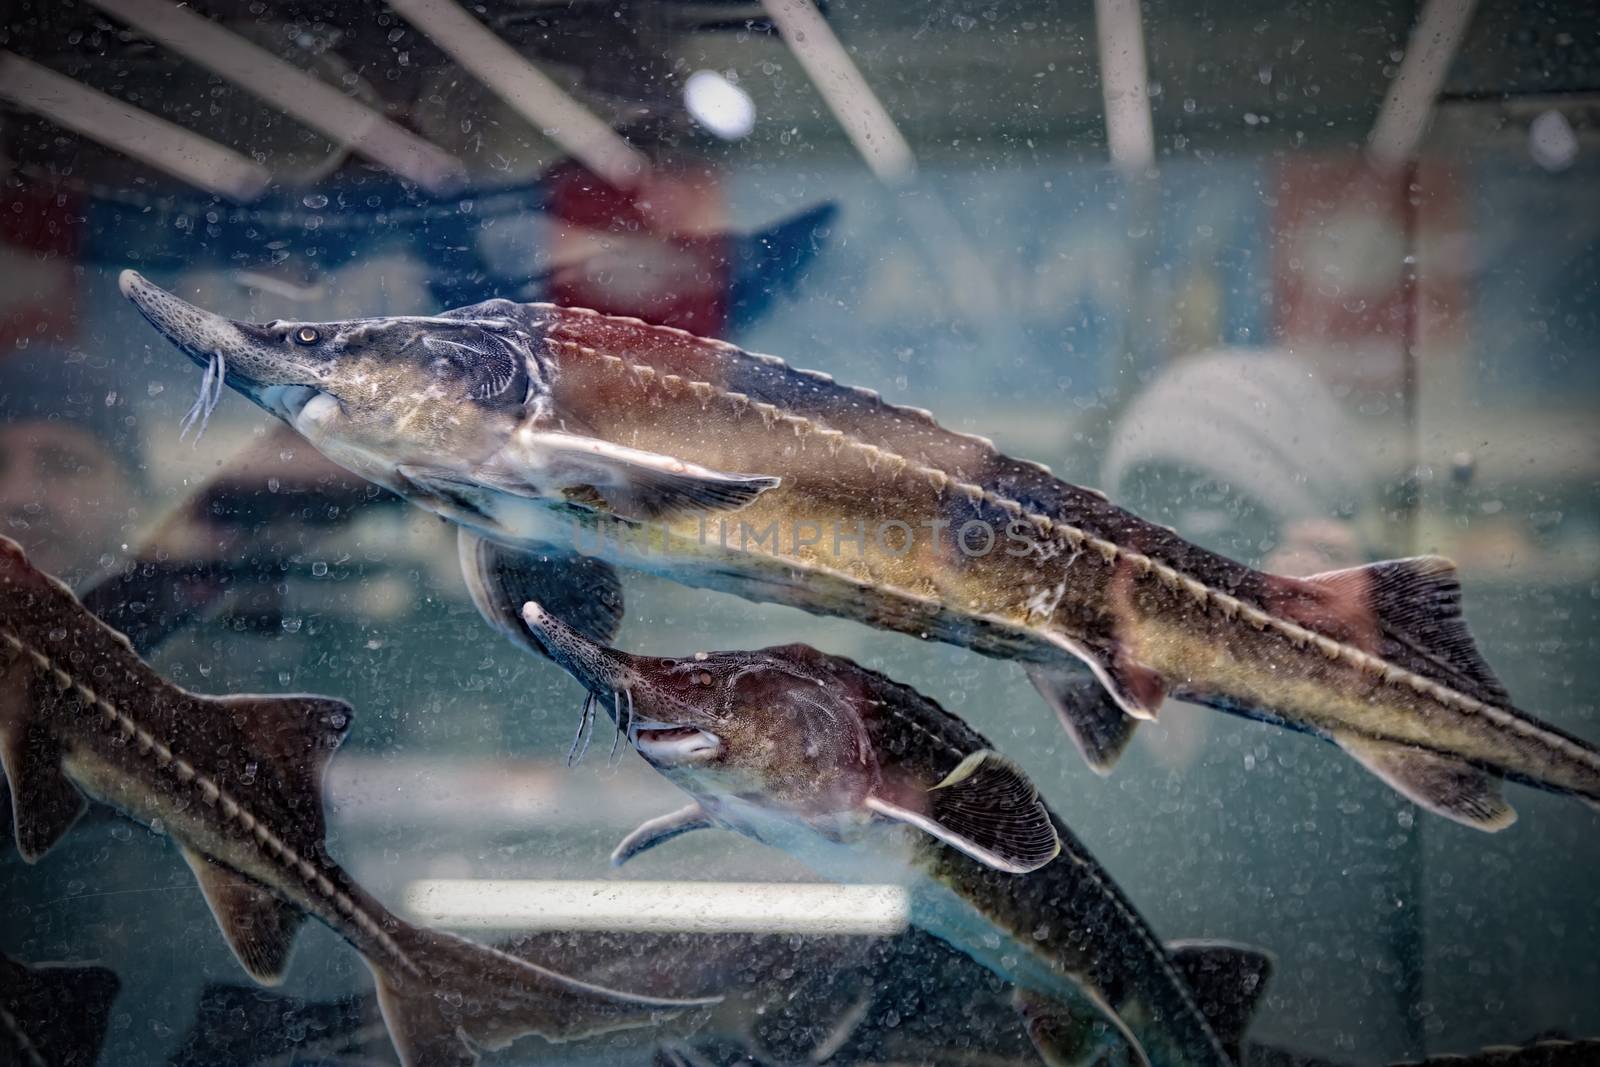 live sturgeon in an aquarium for sale in a grocery store by bonilook